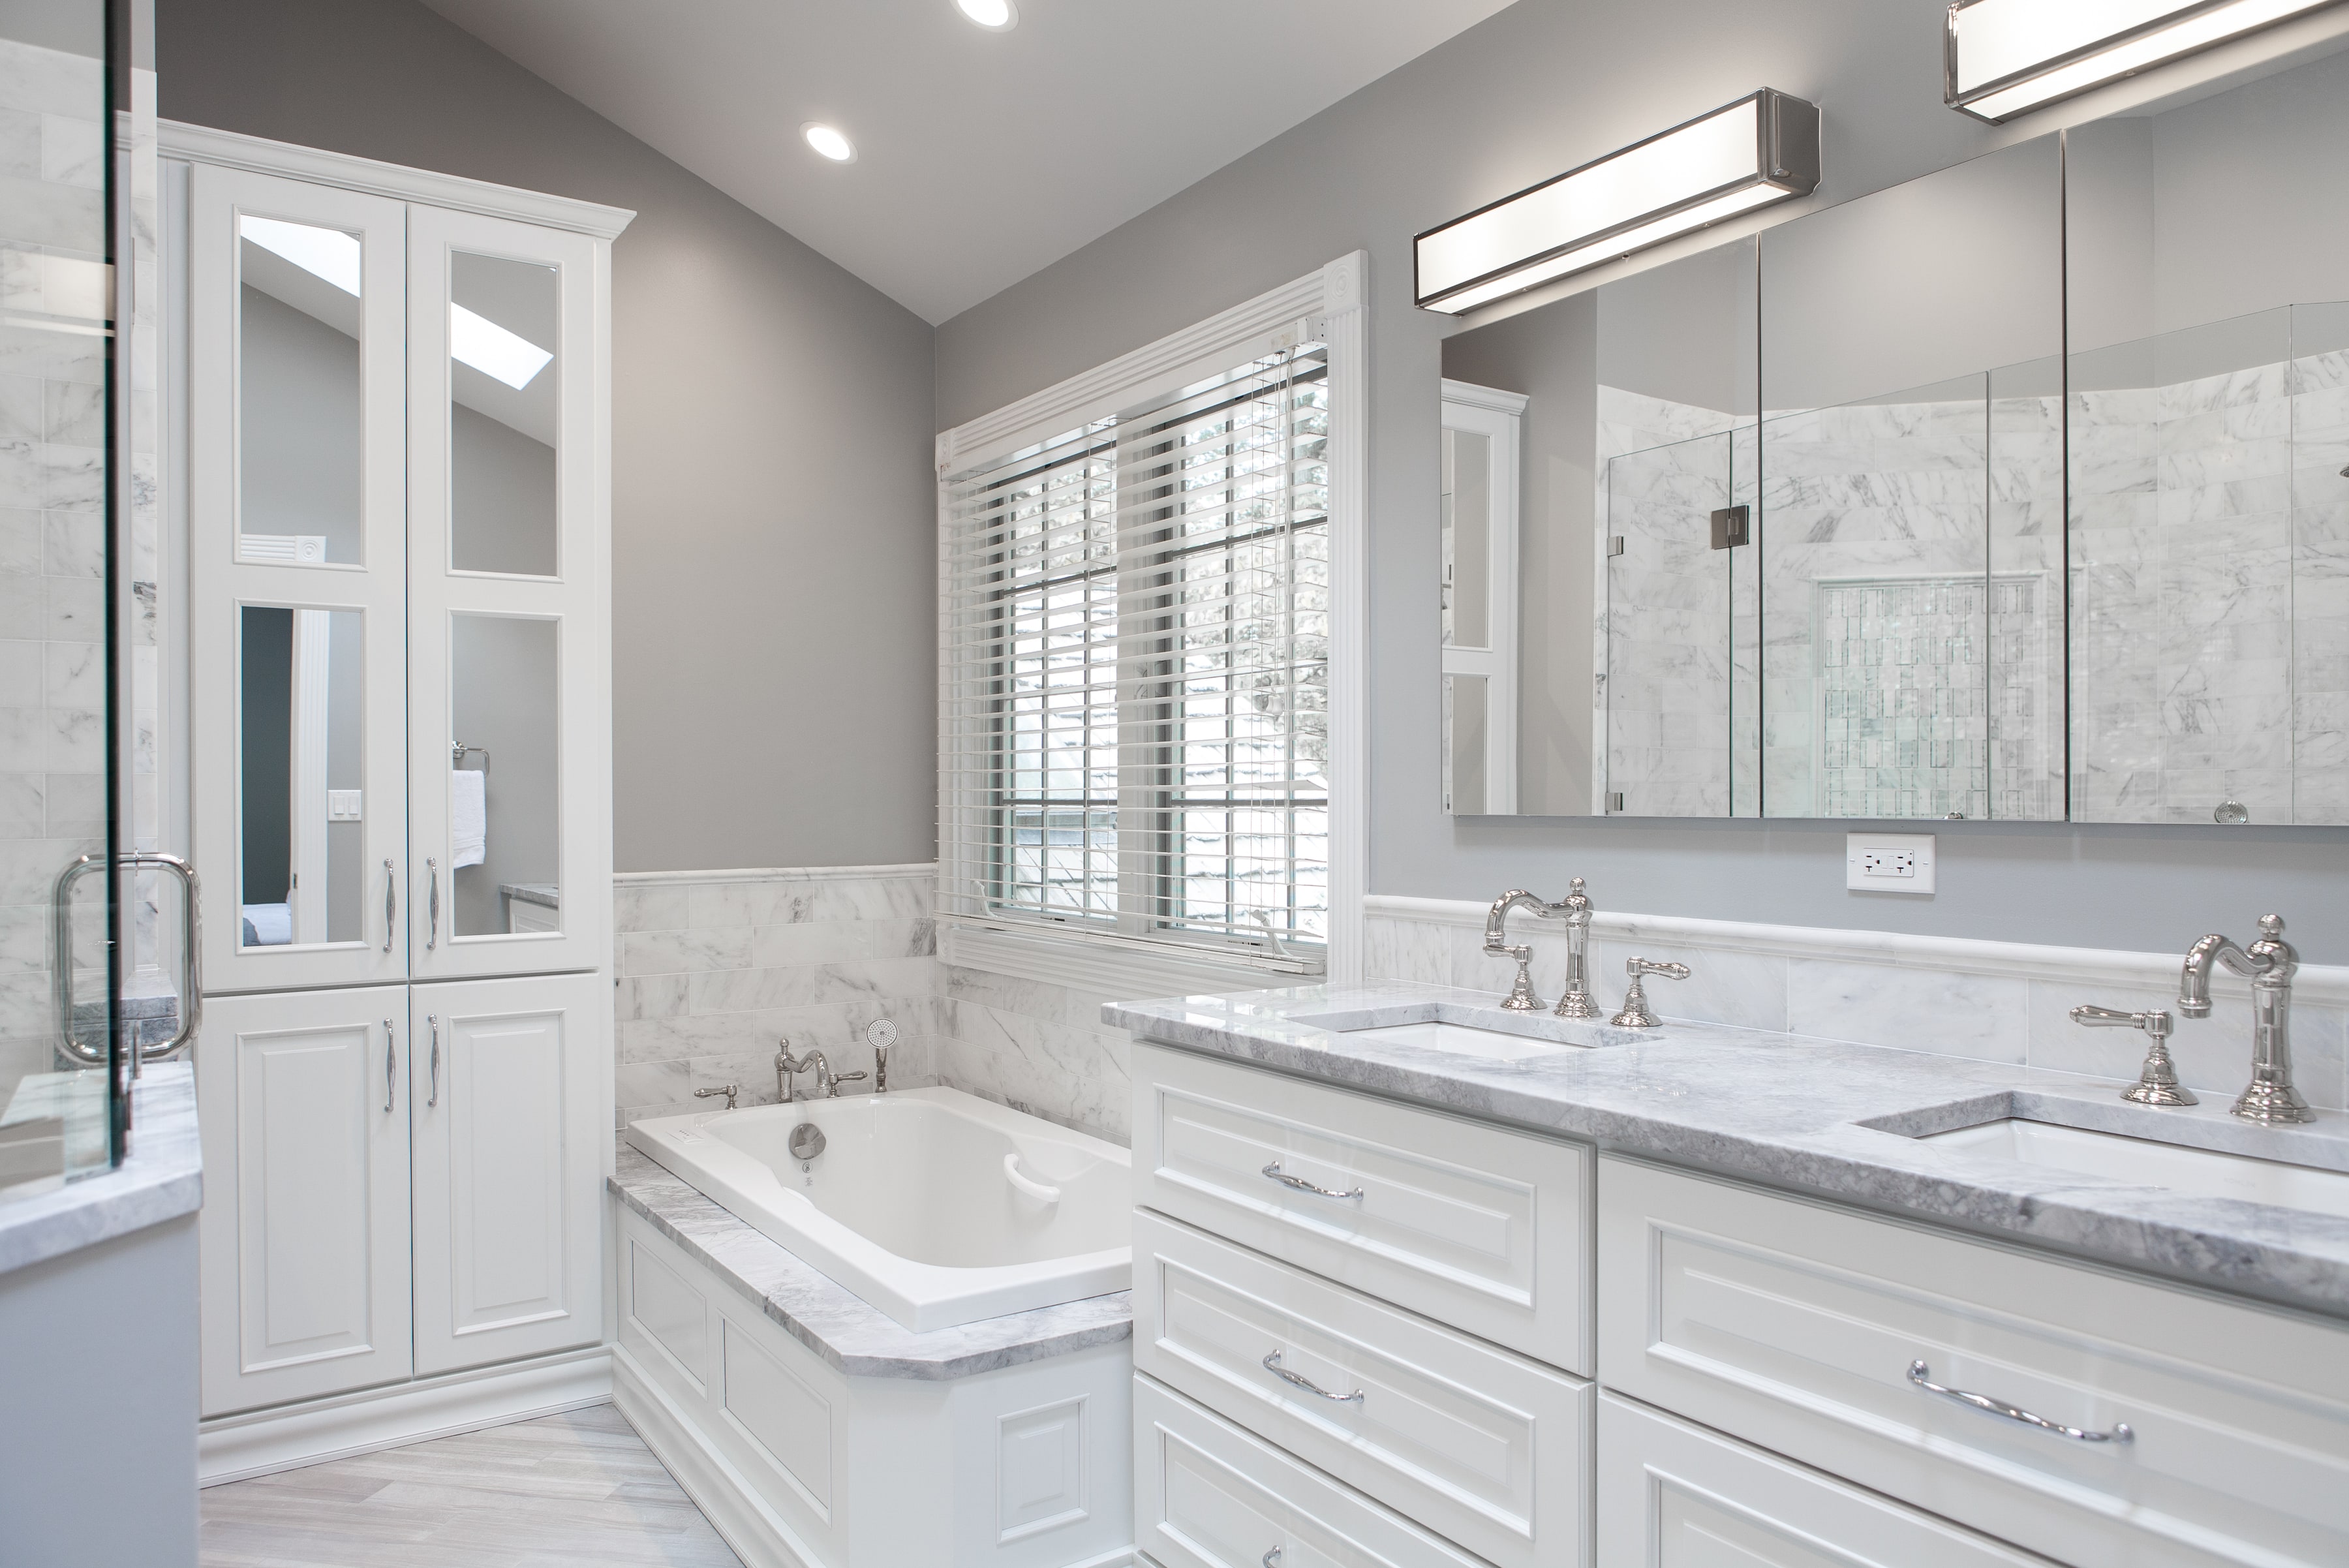 How Much Does A Bathroom Remodel Cost In The Chicago Area